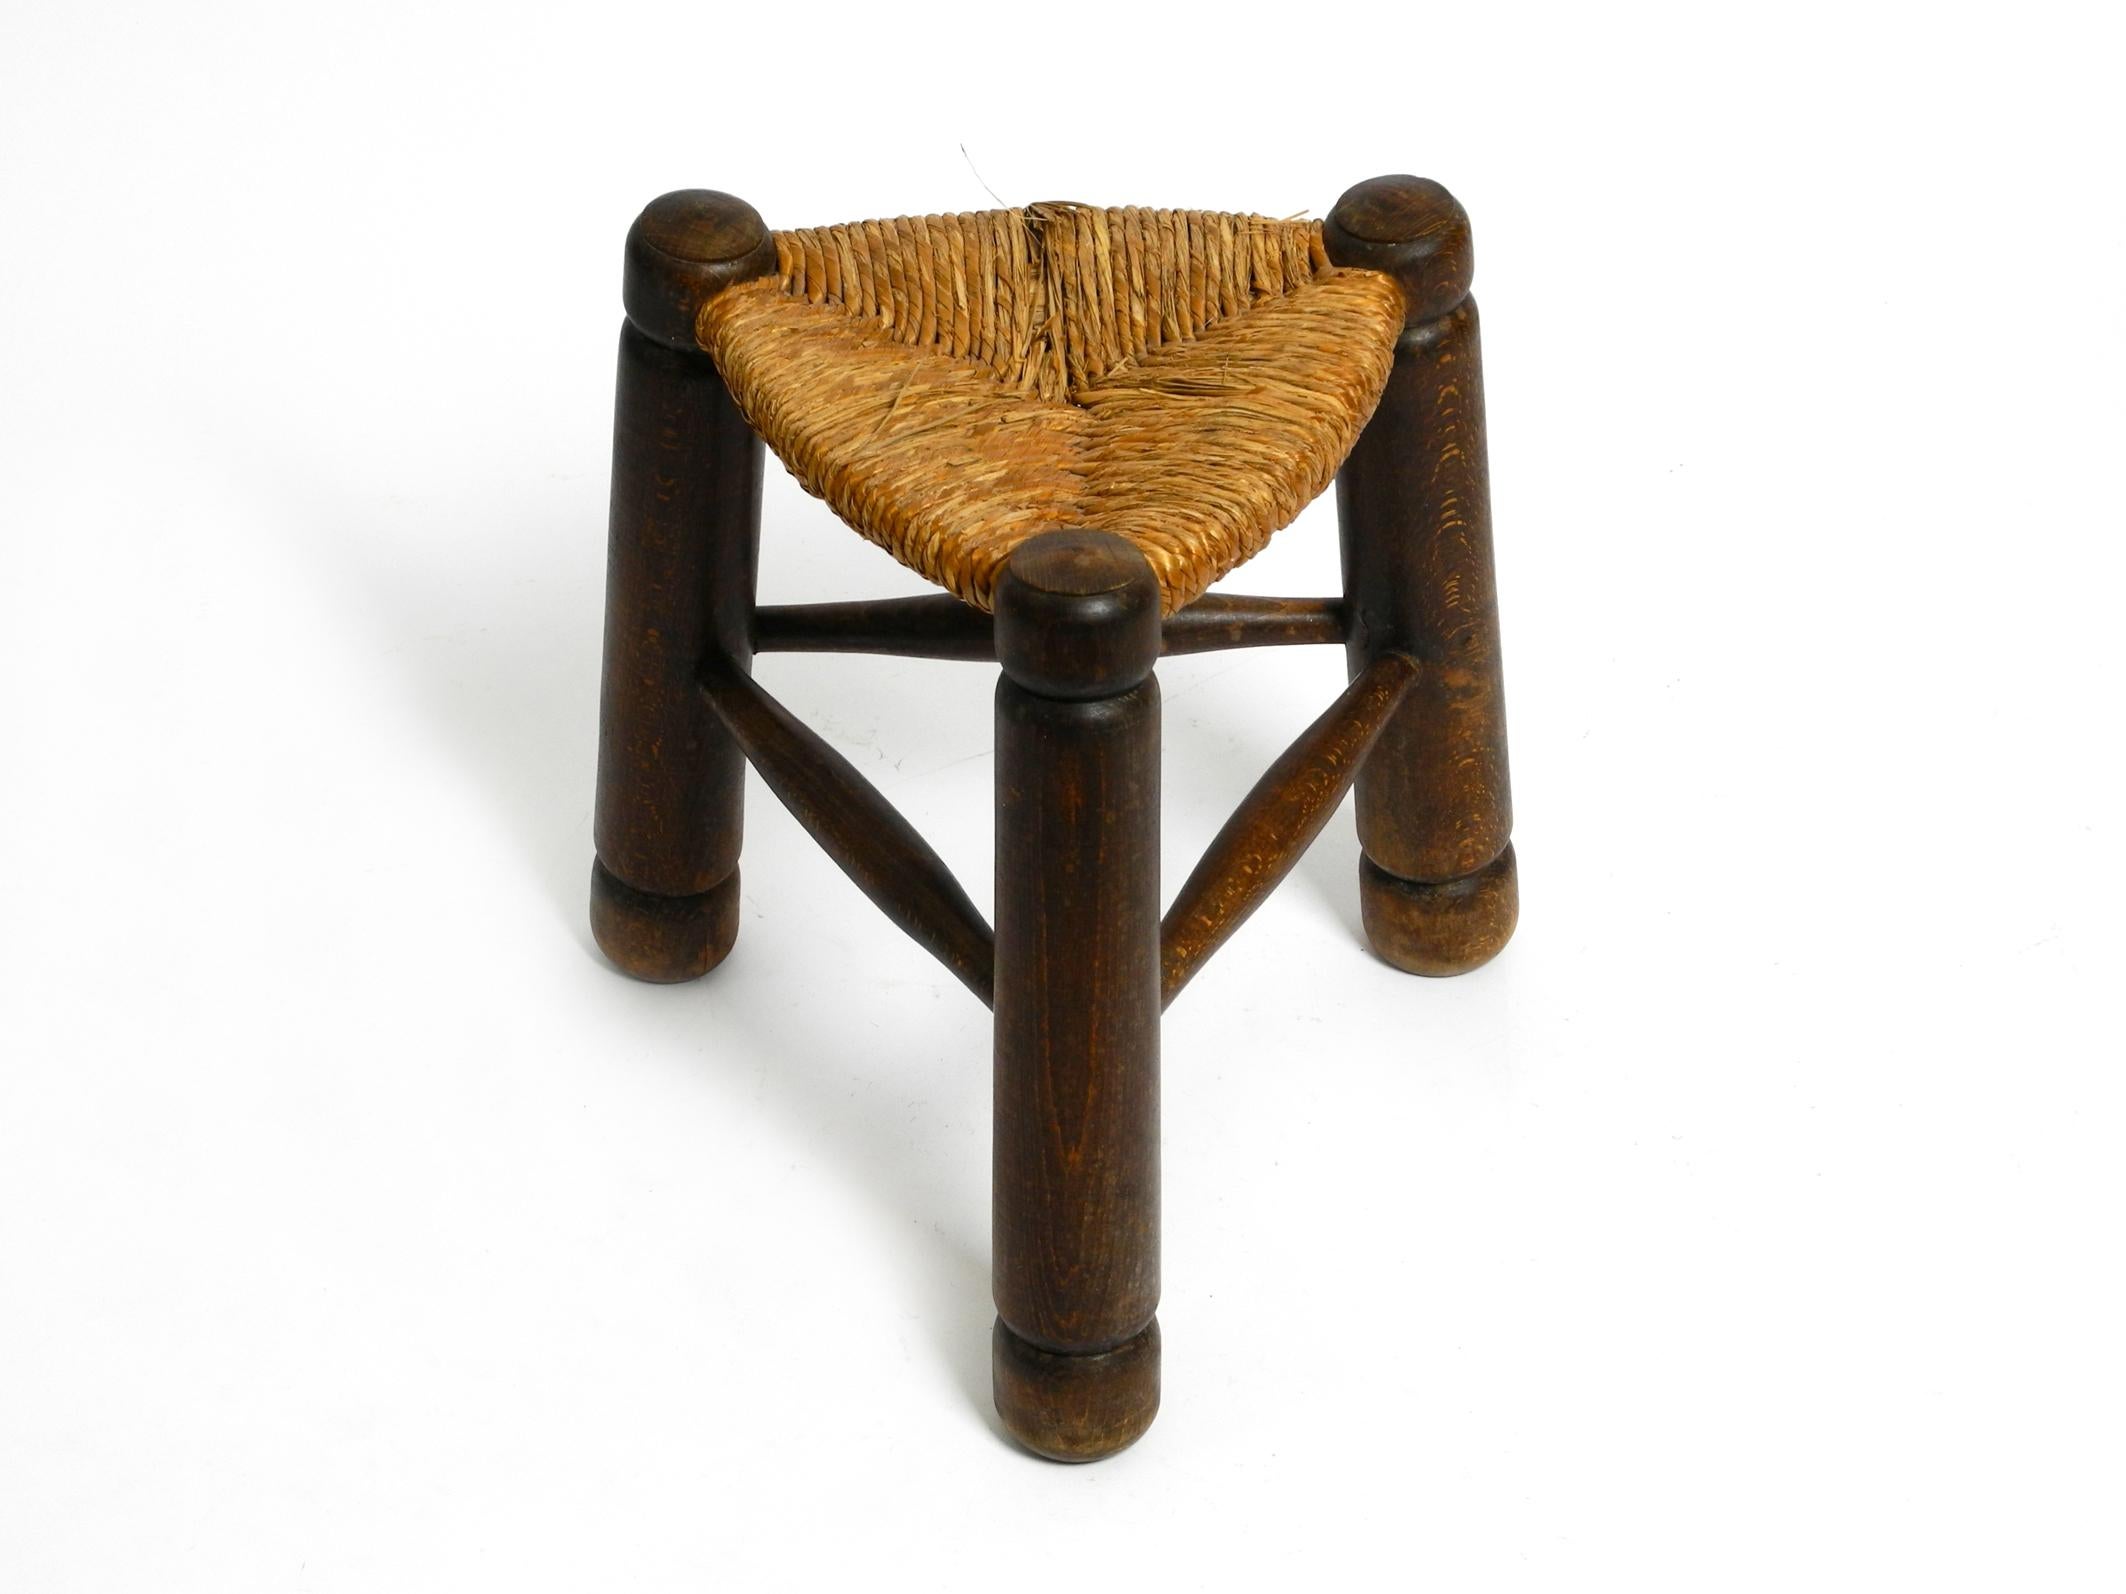 Original 1930s small French solid oak wood tripod stool with rush weave seat 13